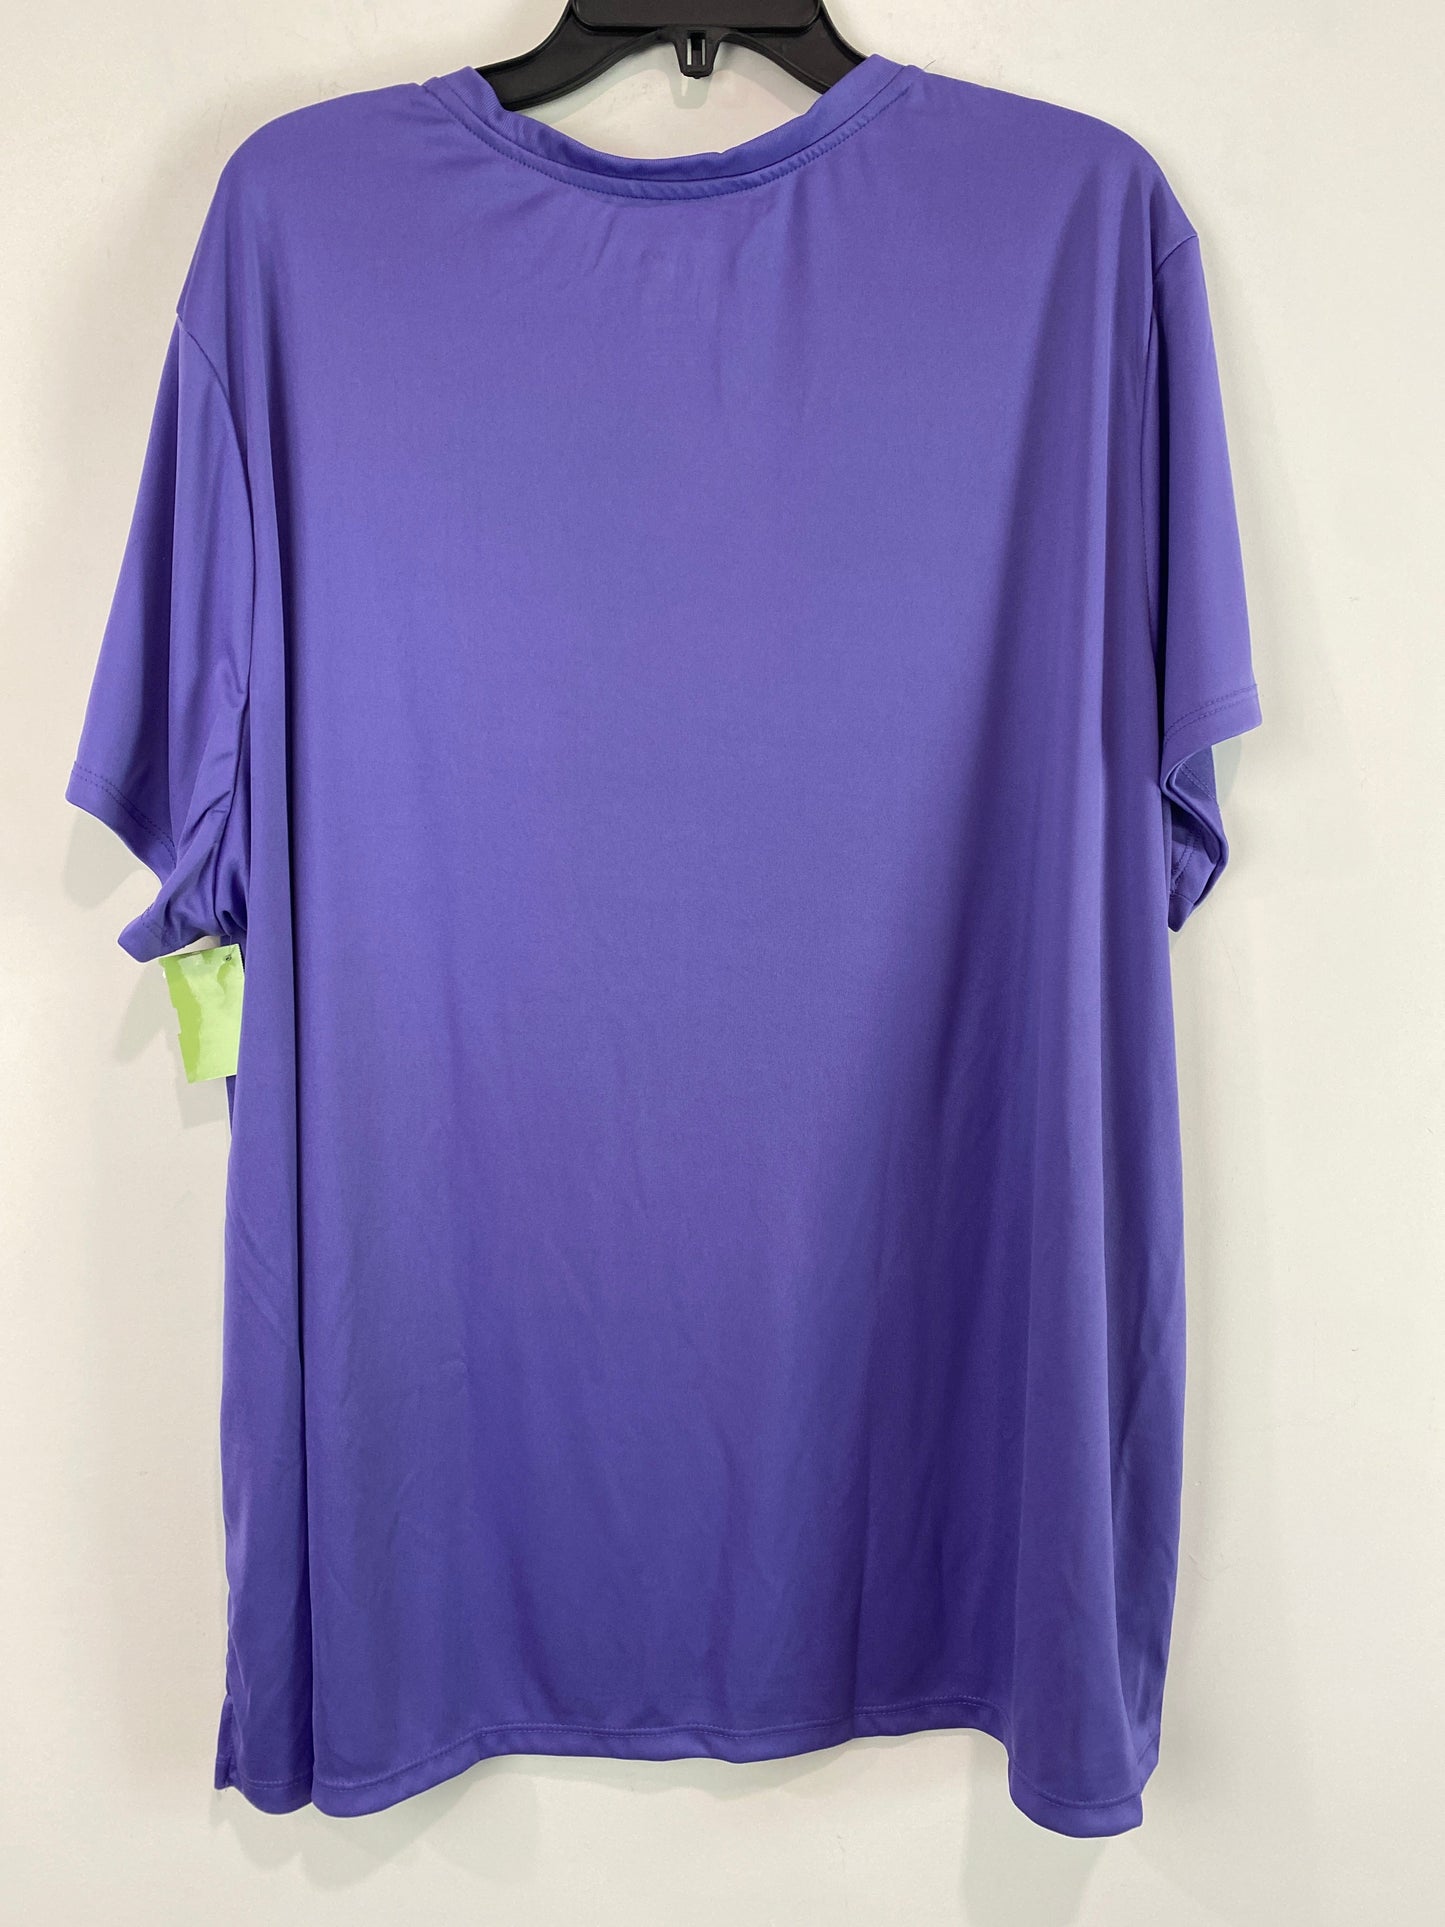 Athletic Top Short Sleeve By Just My Size  Size: 4x